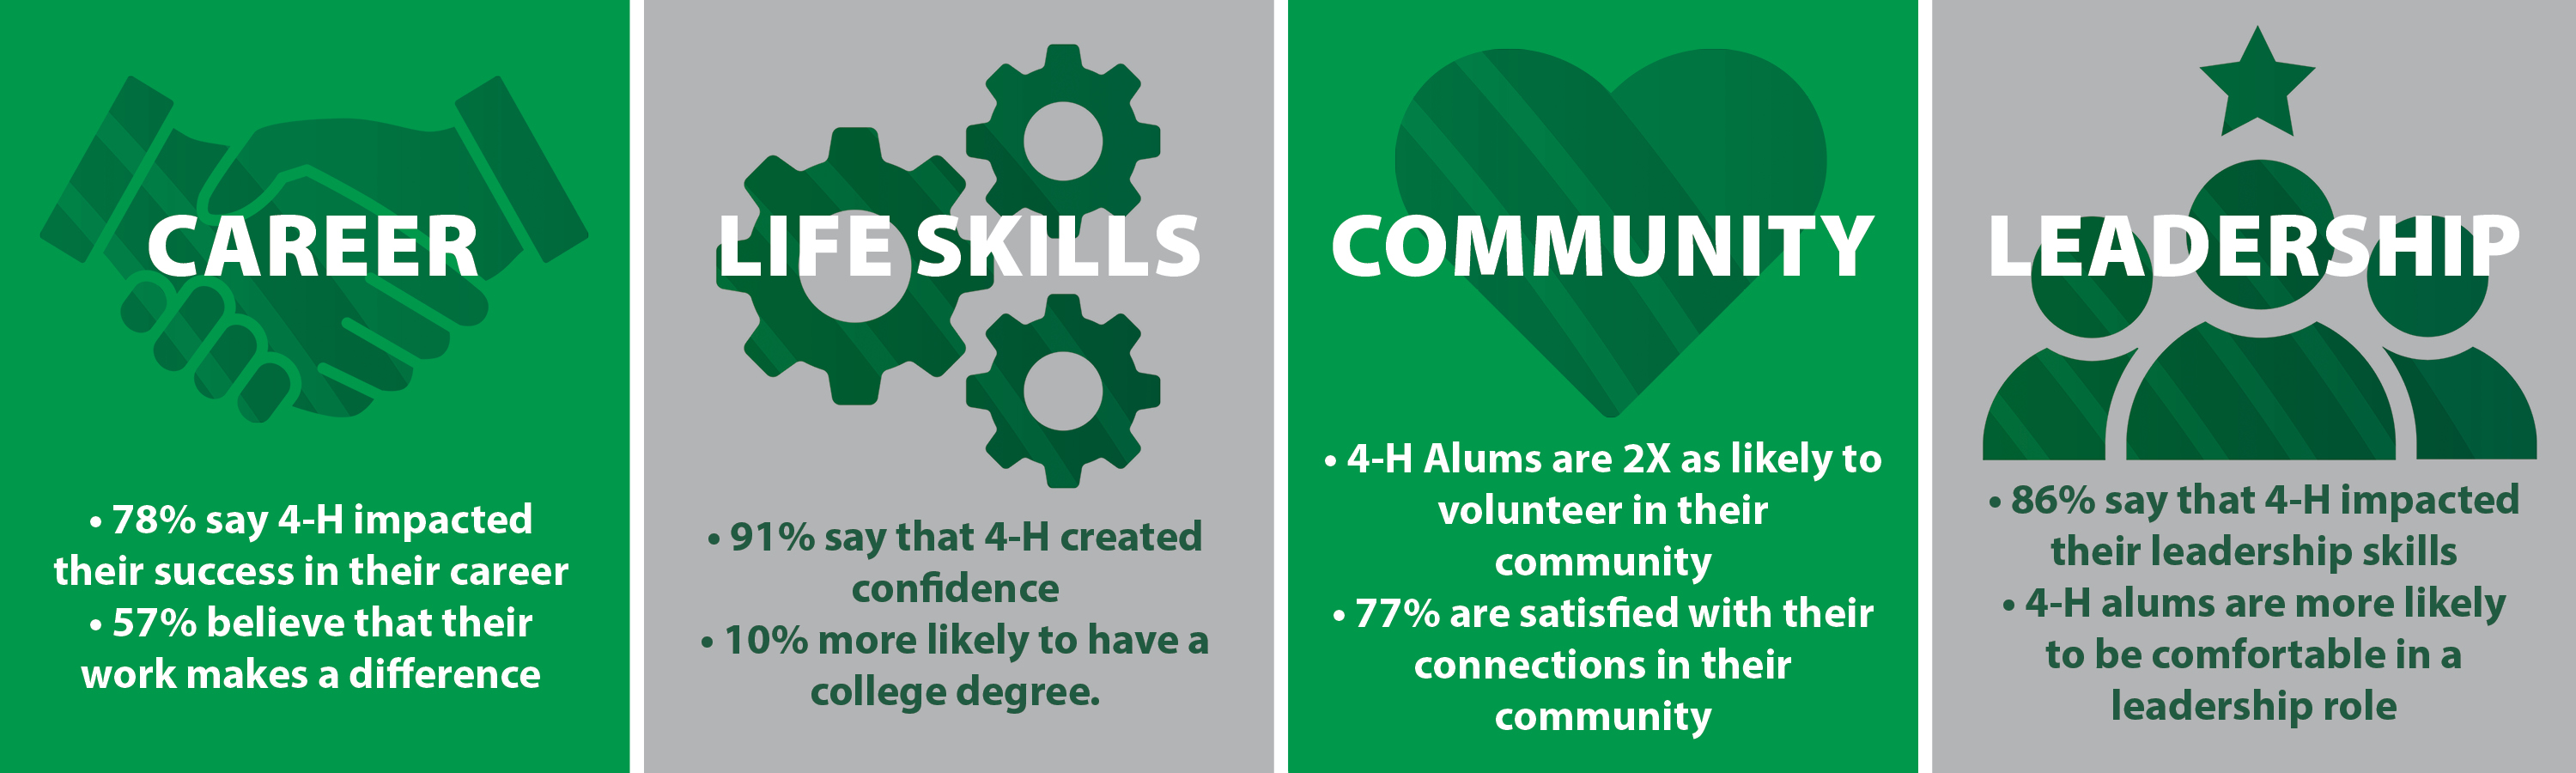 78% say 4-h impacted their success in their career, 57% believe that their work makes a difference; 91% say that 4-h created confidence; 10% more likely to have a college degree; 4-h alums are 2x as likely to volunteer in their community; 77% are satisfied with their connections in their community; 86% say that 4-h impacted their leadership skills; 4-h alums are more likely to be comfortable in a leadership role